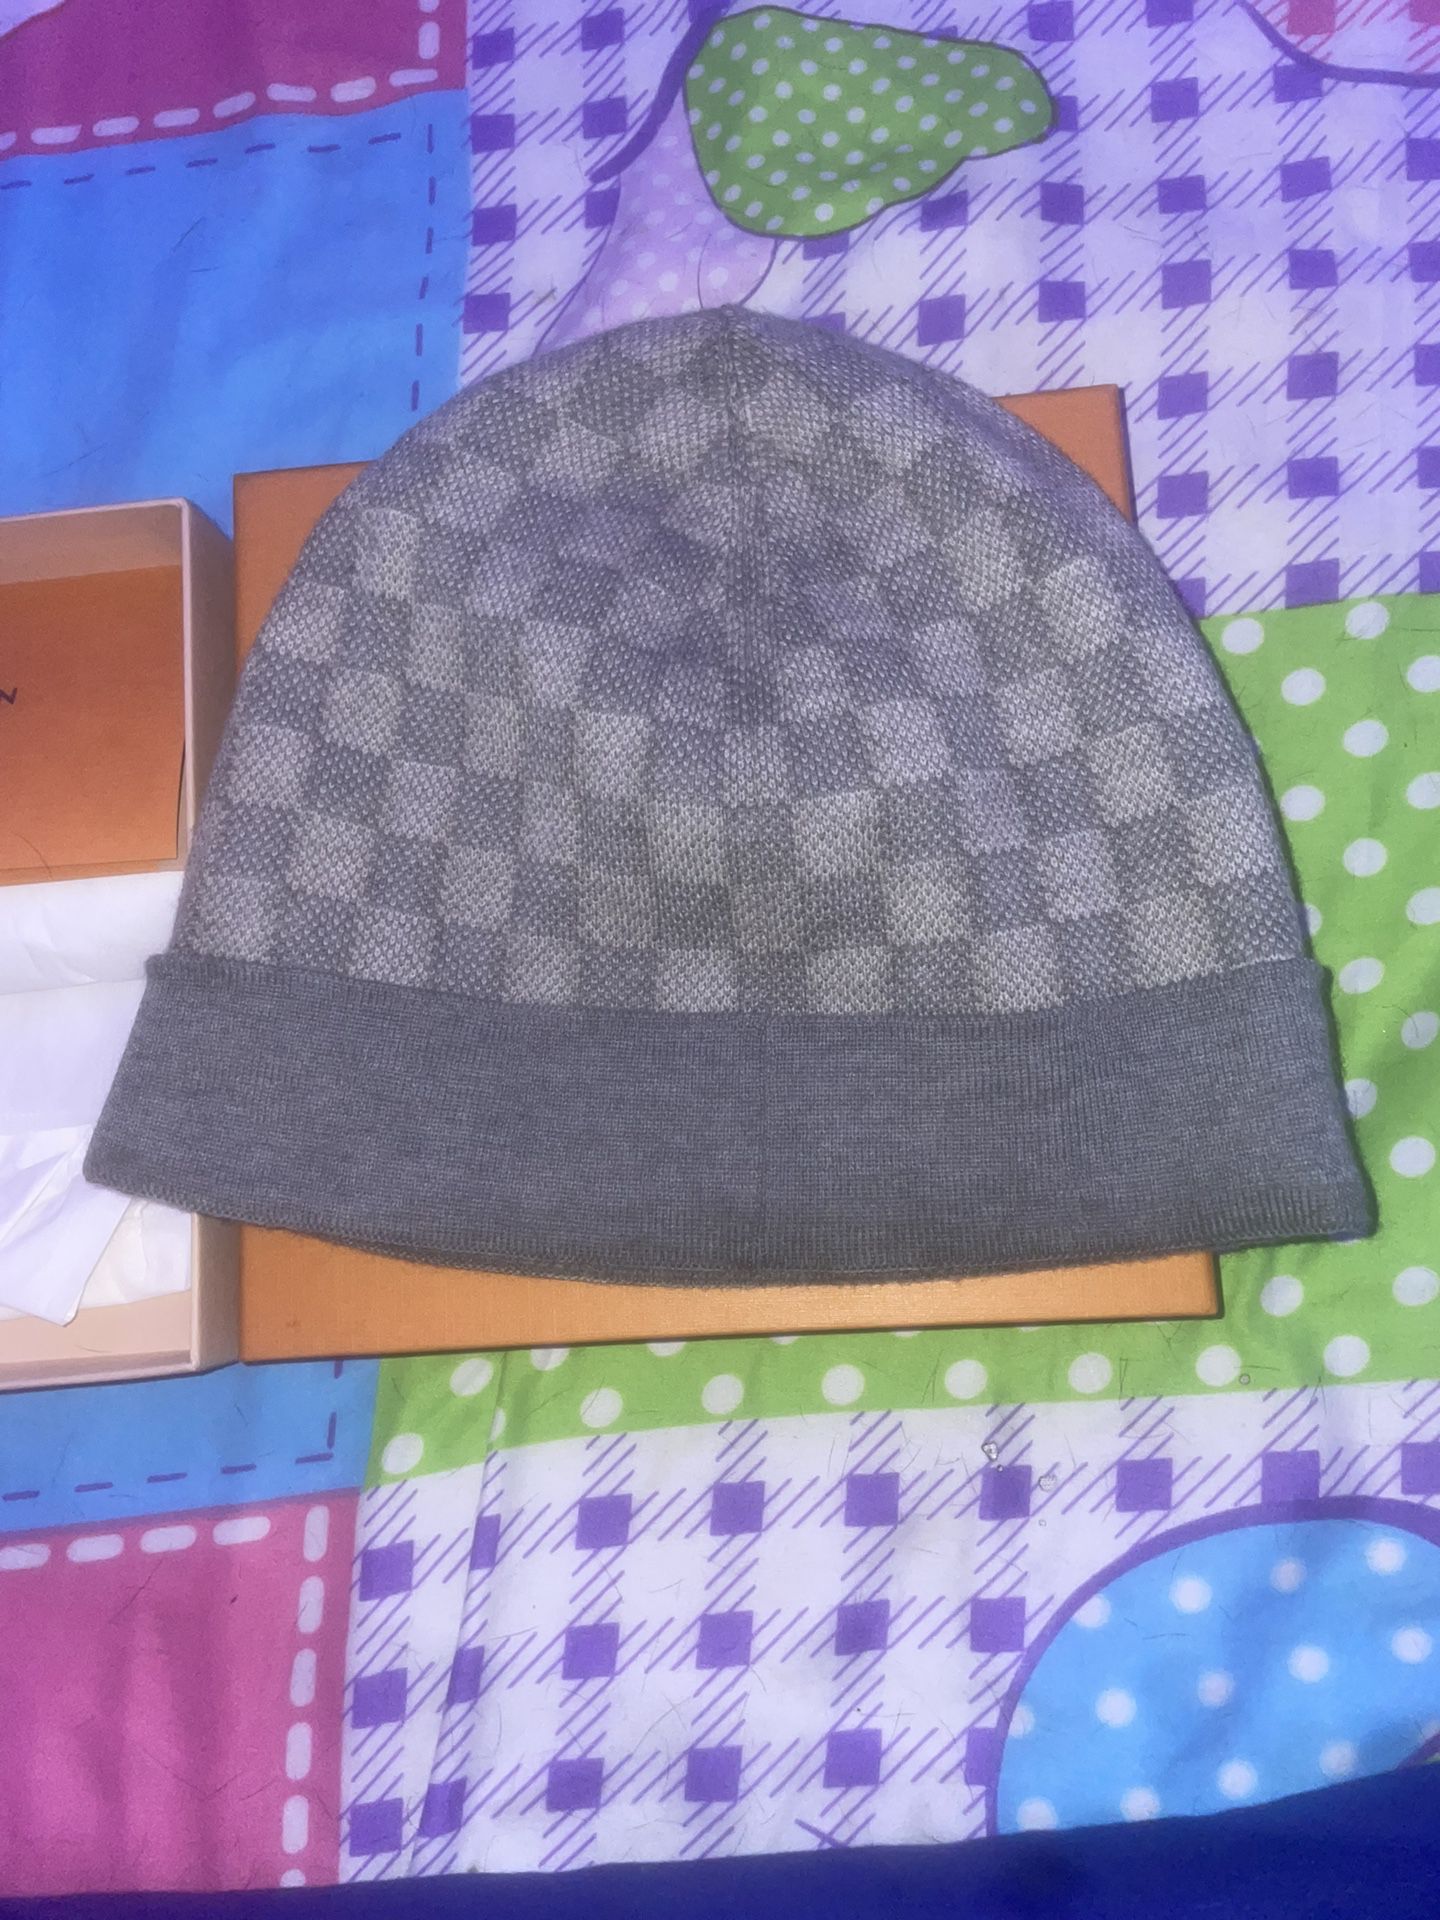 Black Louies Vuitton Beanie for Sale in New York, NY - OfferUp